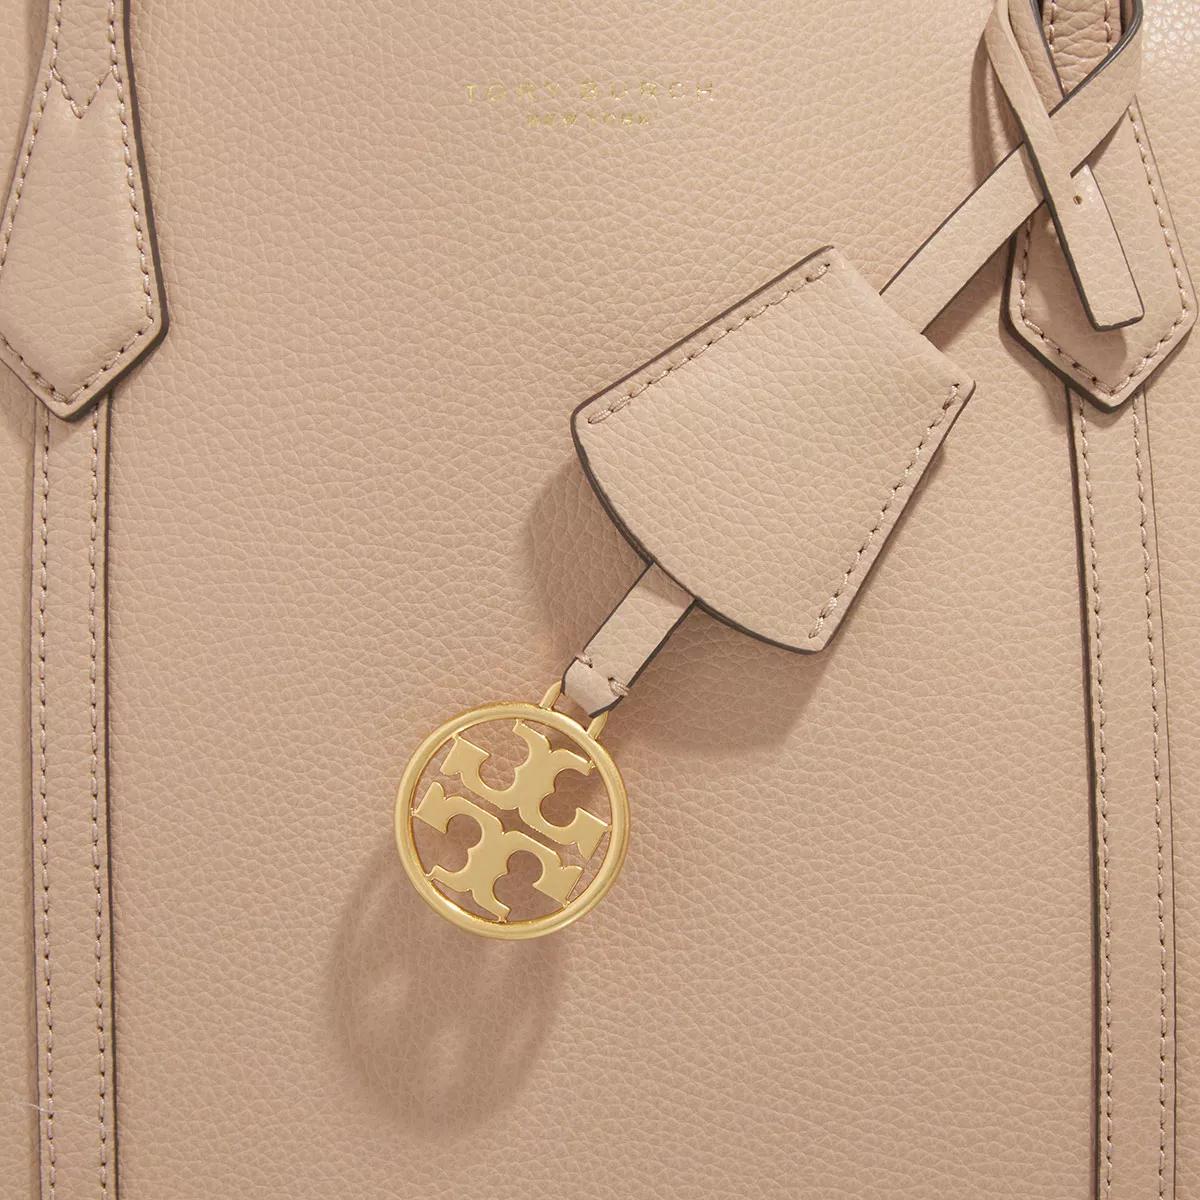 NEW Tory Burch Devon Sand Perry Triple Compartment Tote $348